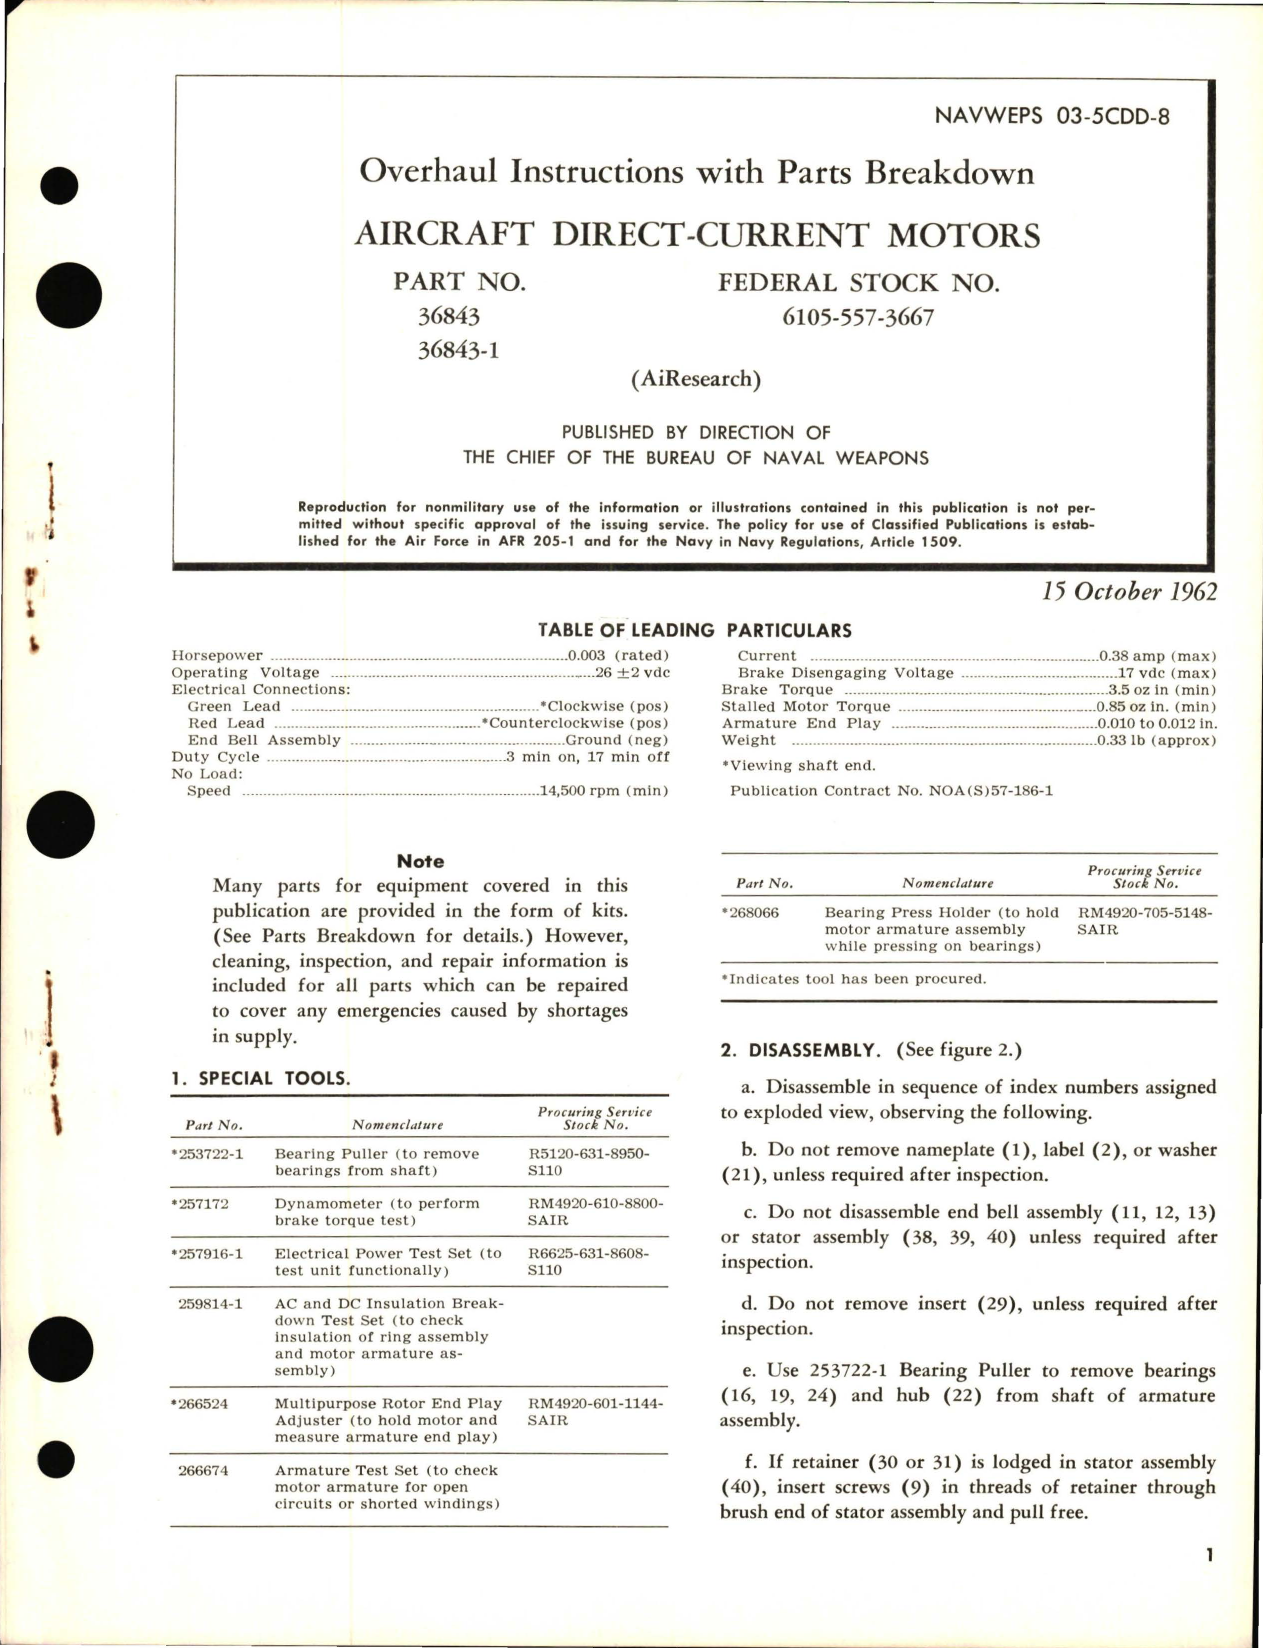 Sample page 1 from AirCorps Library document: Overhaul Instructions with Parts Breakdown for Aircraft Direct-Current Motors - Part 36843 and 36843-1